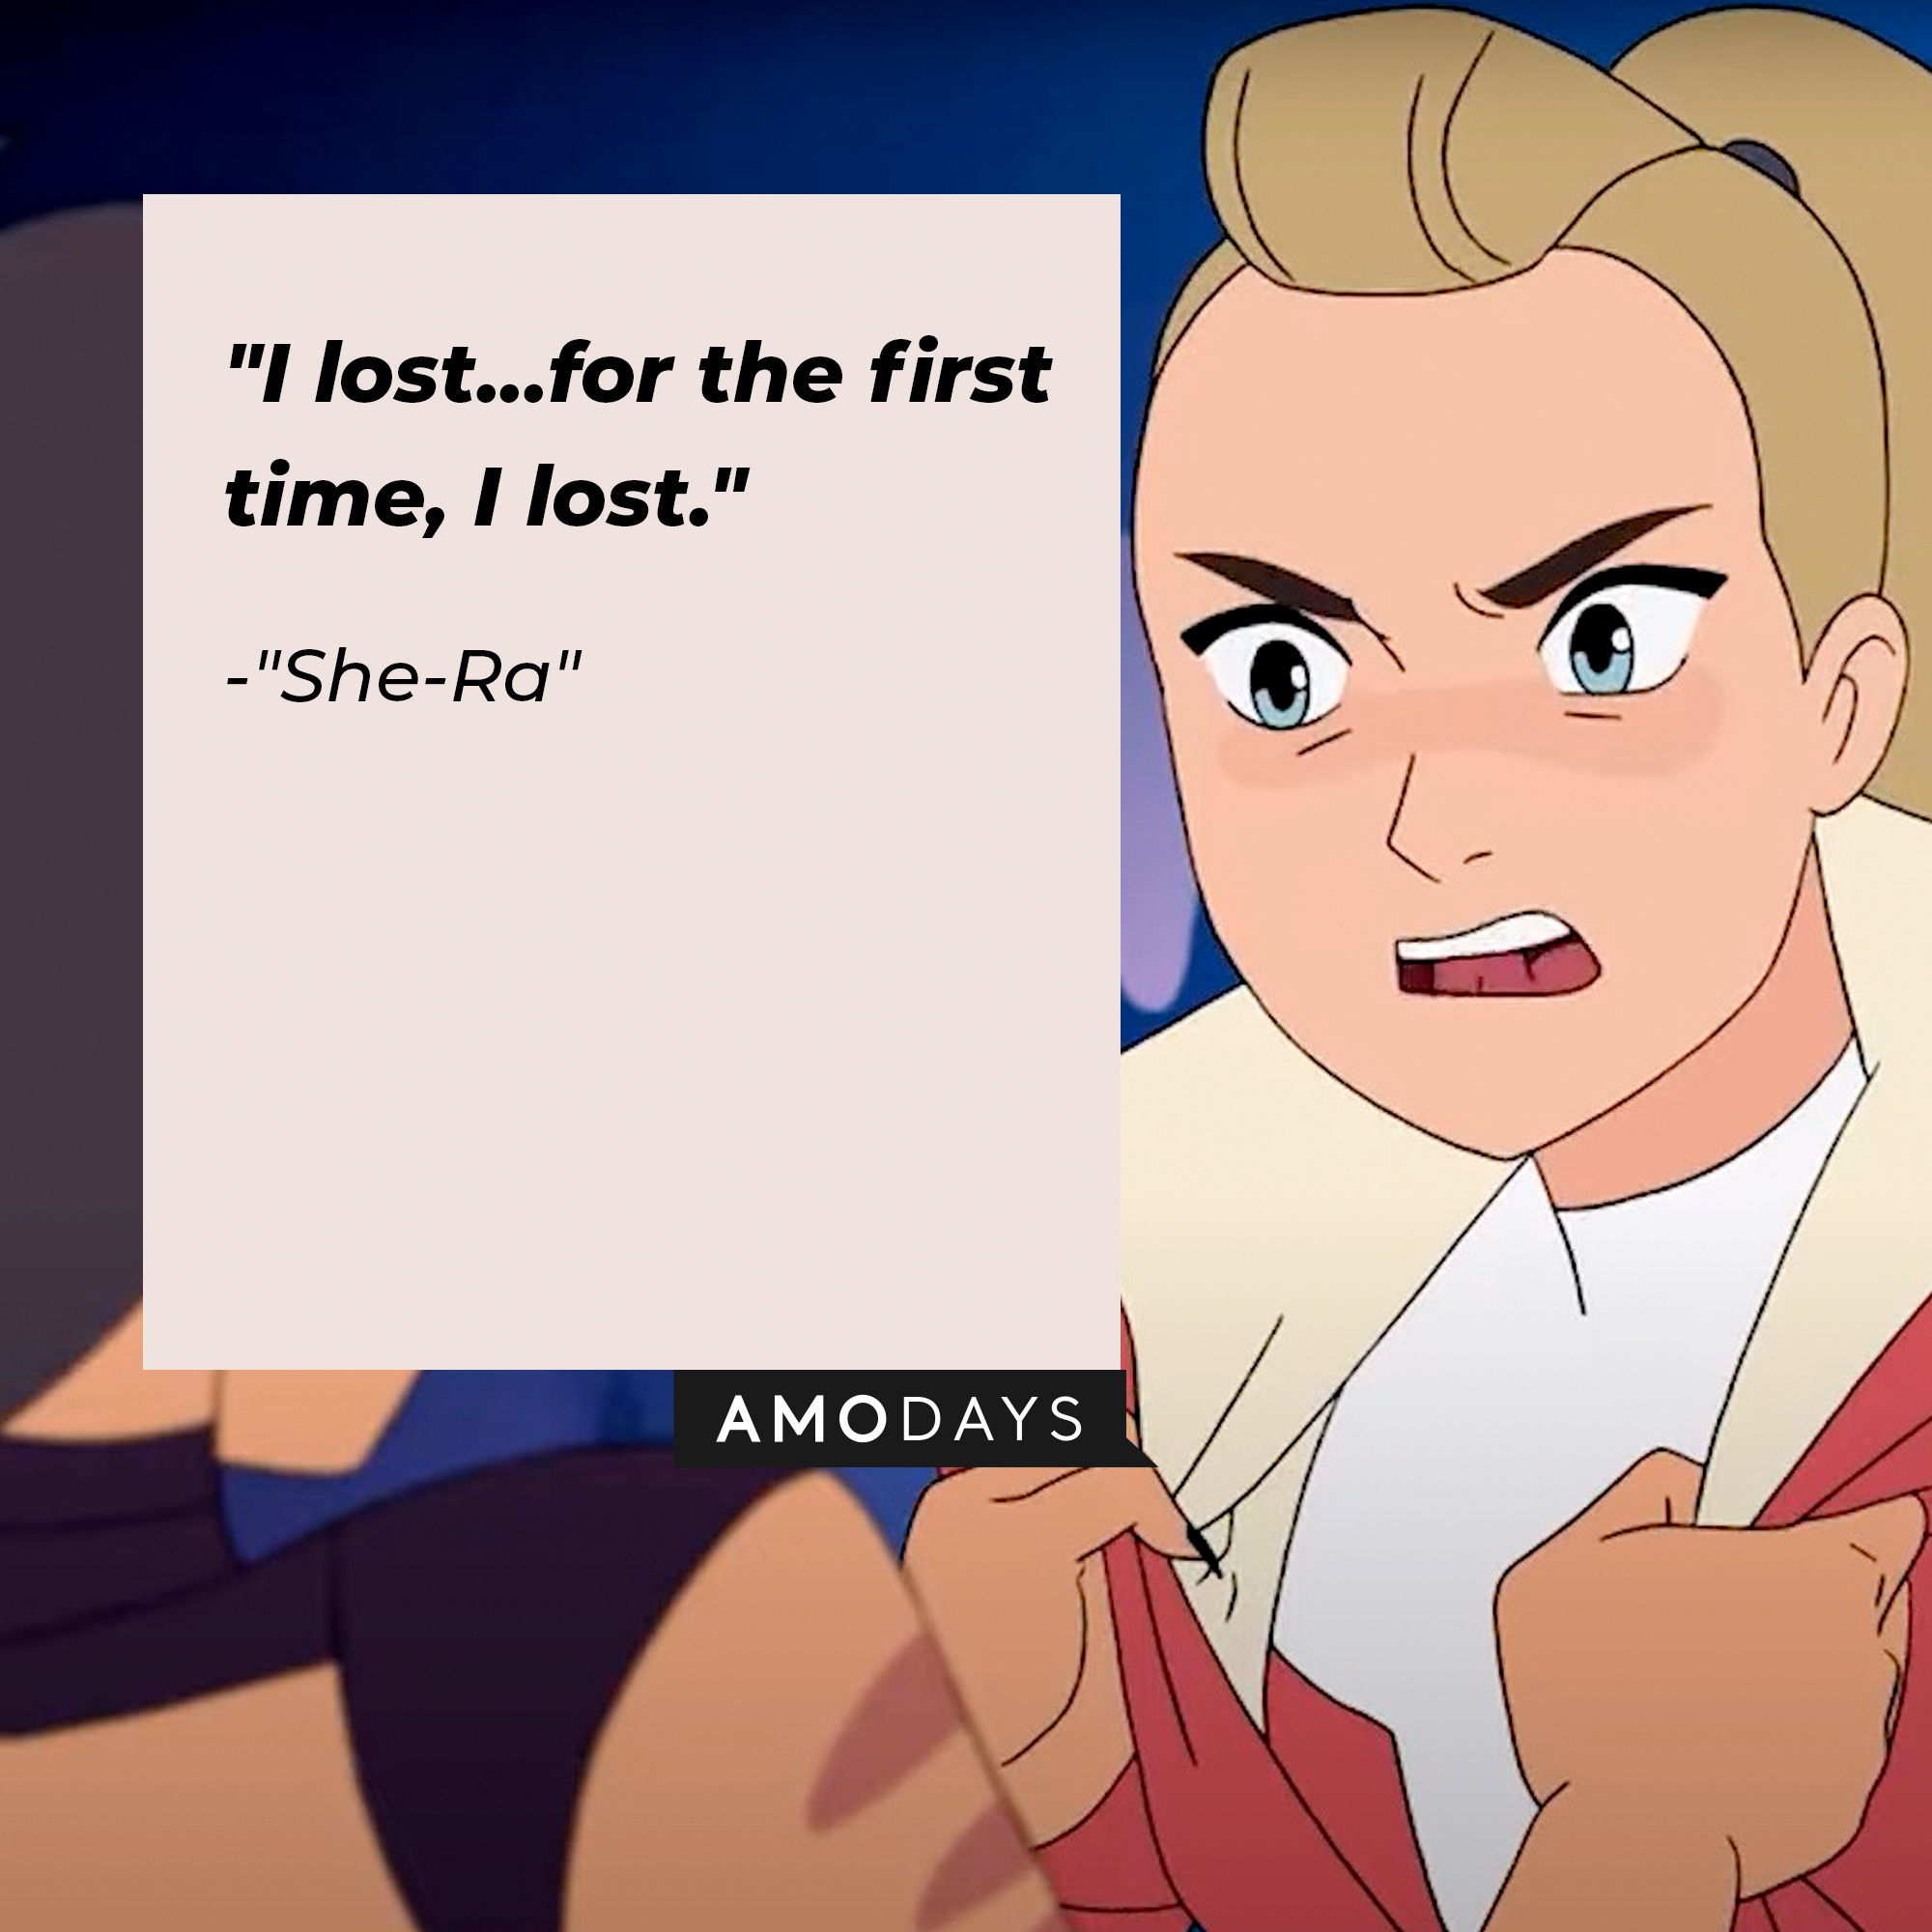 "She-Ra's" quote: "I lost... for the first time, I lost." | Source: Facebook.com/DreamWorksSheRa